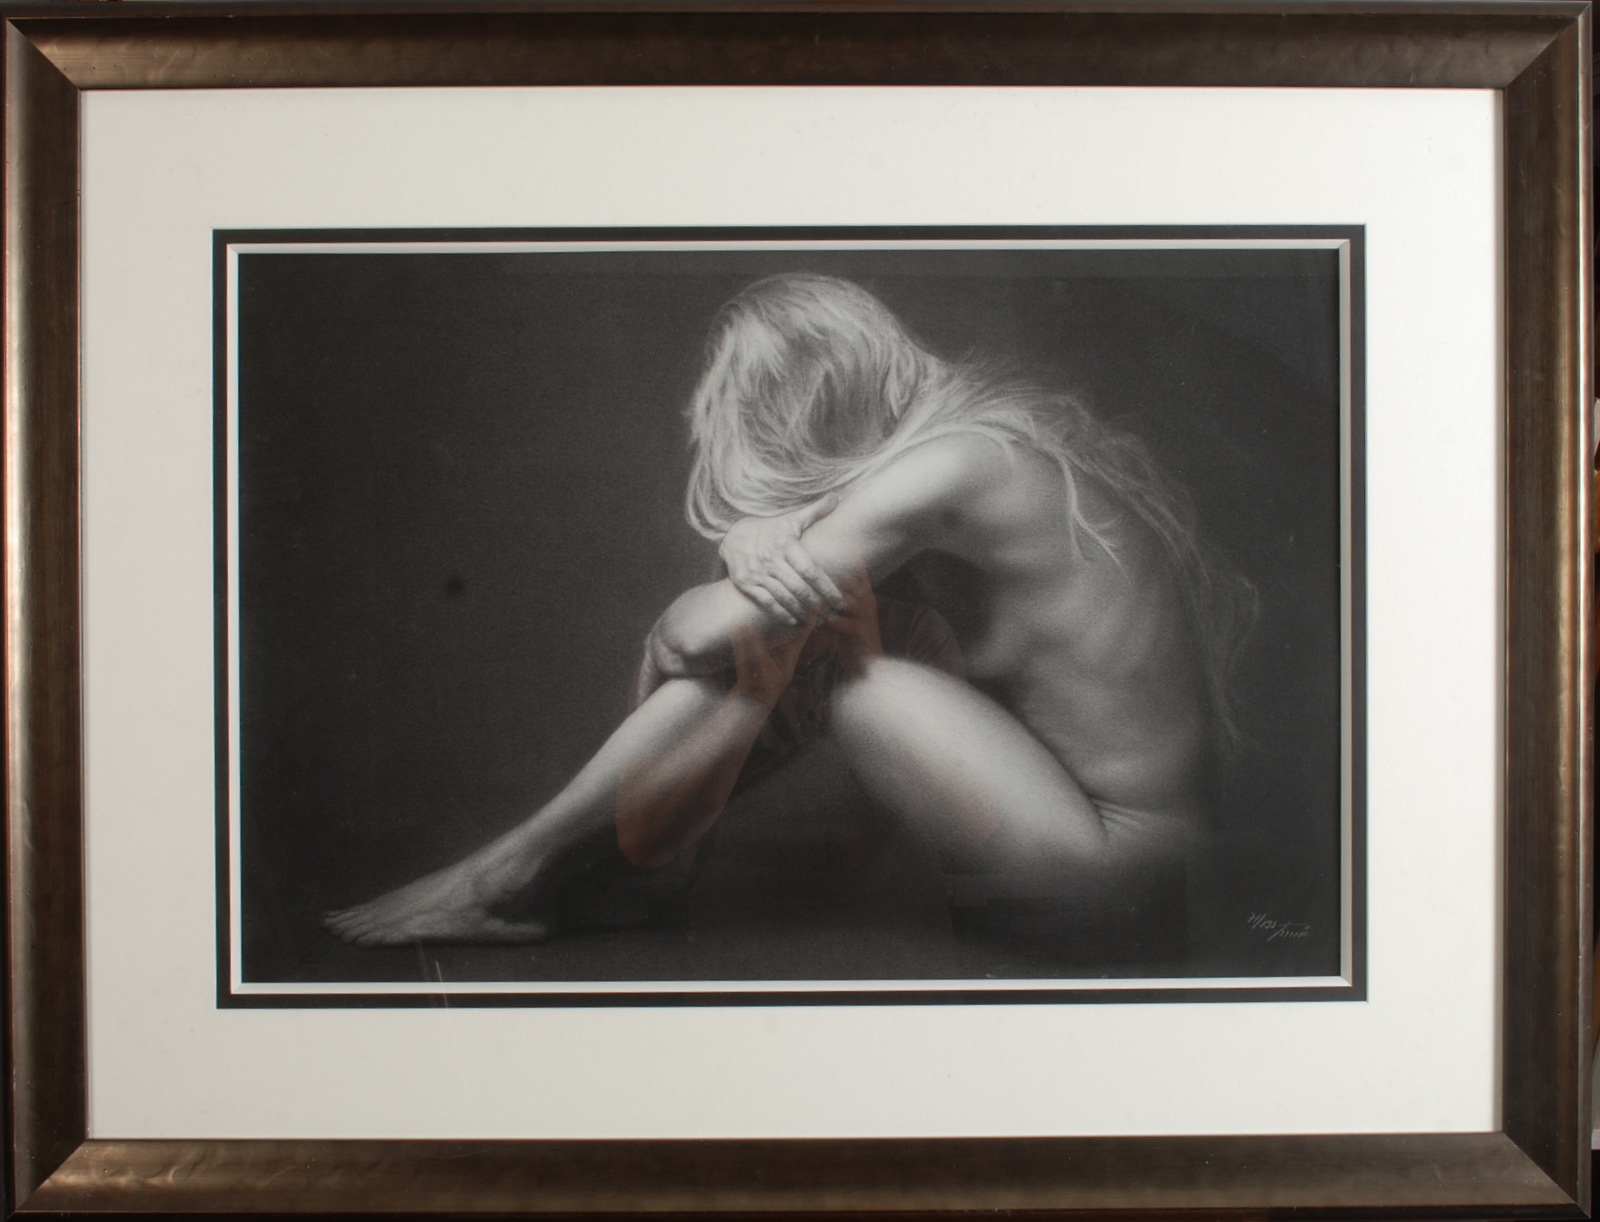 DAMIR SIMIC Repose Giclee print Signed and numbered 71/195 45 x 69 cm Together with a print by - Image 3 of 4